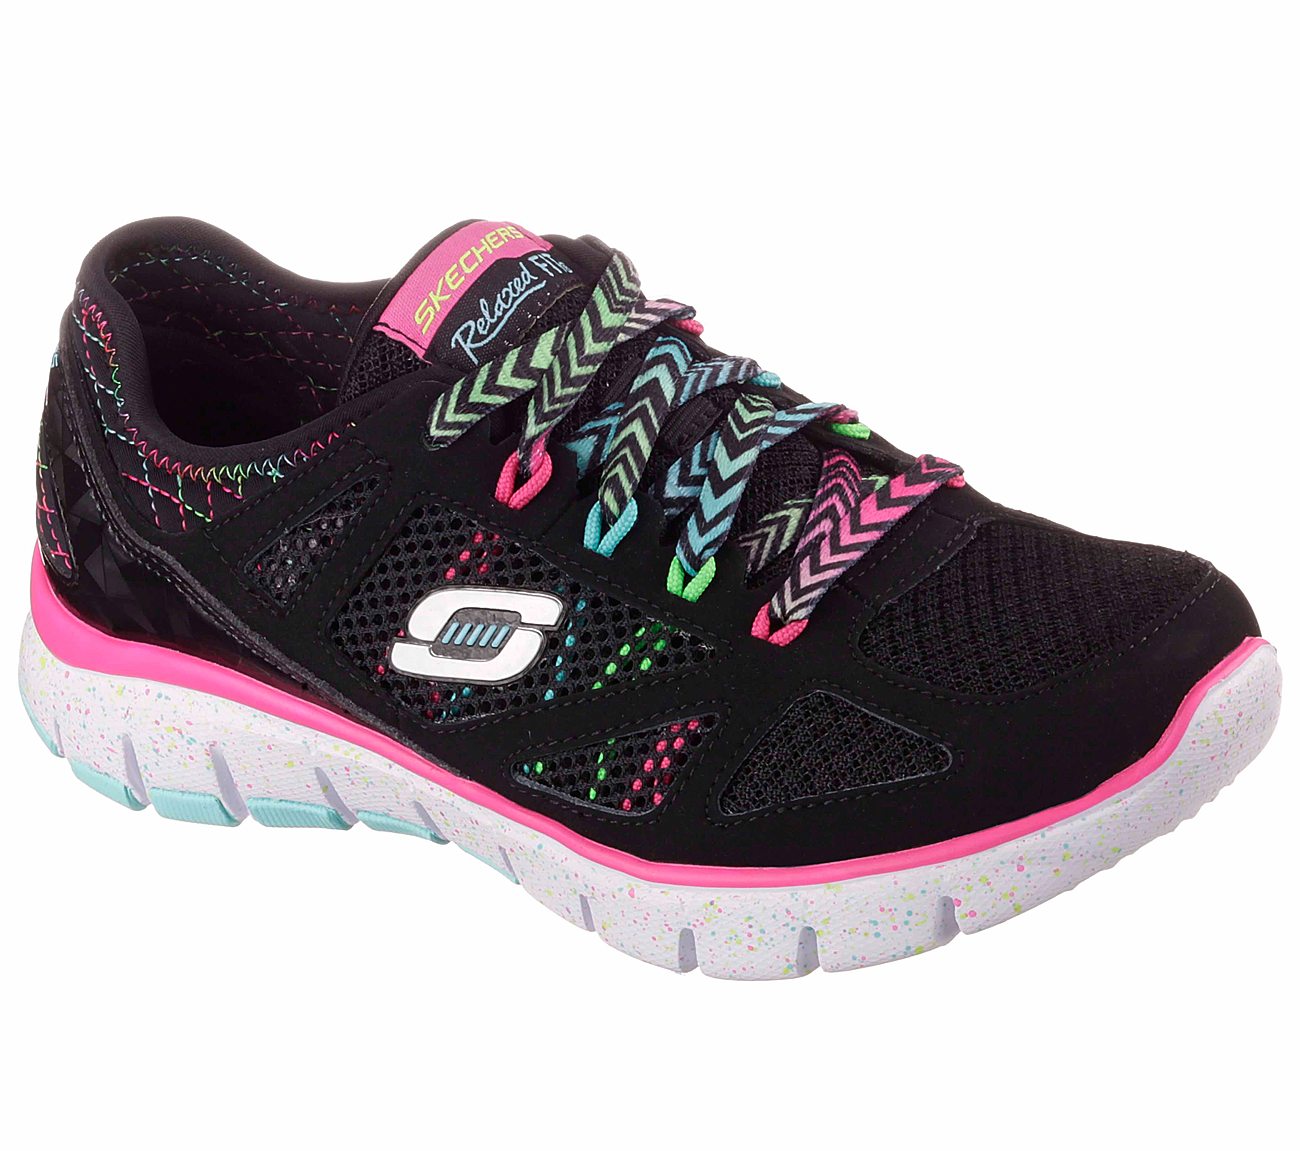 Fashion Play SKECHERS Relaxed Fit Shoes